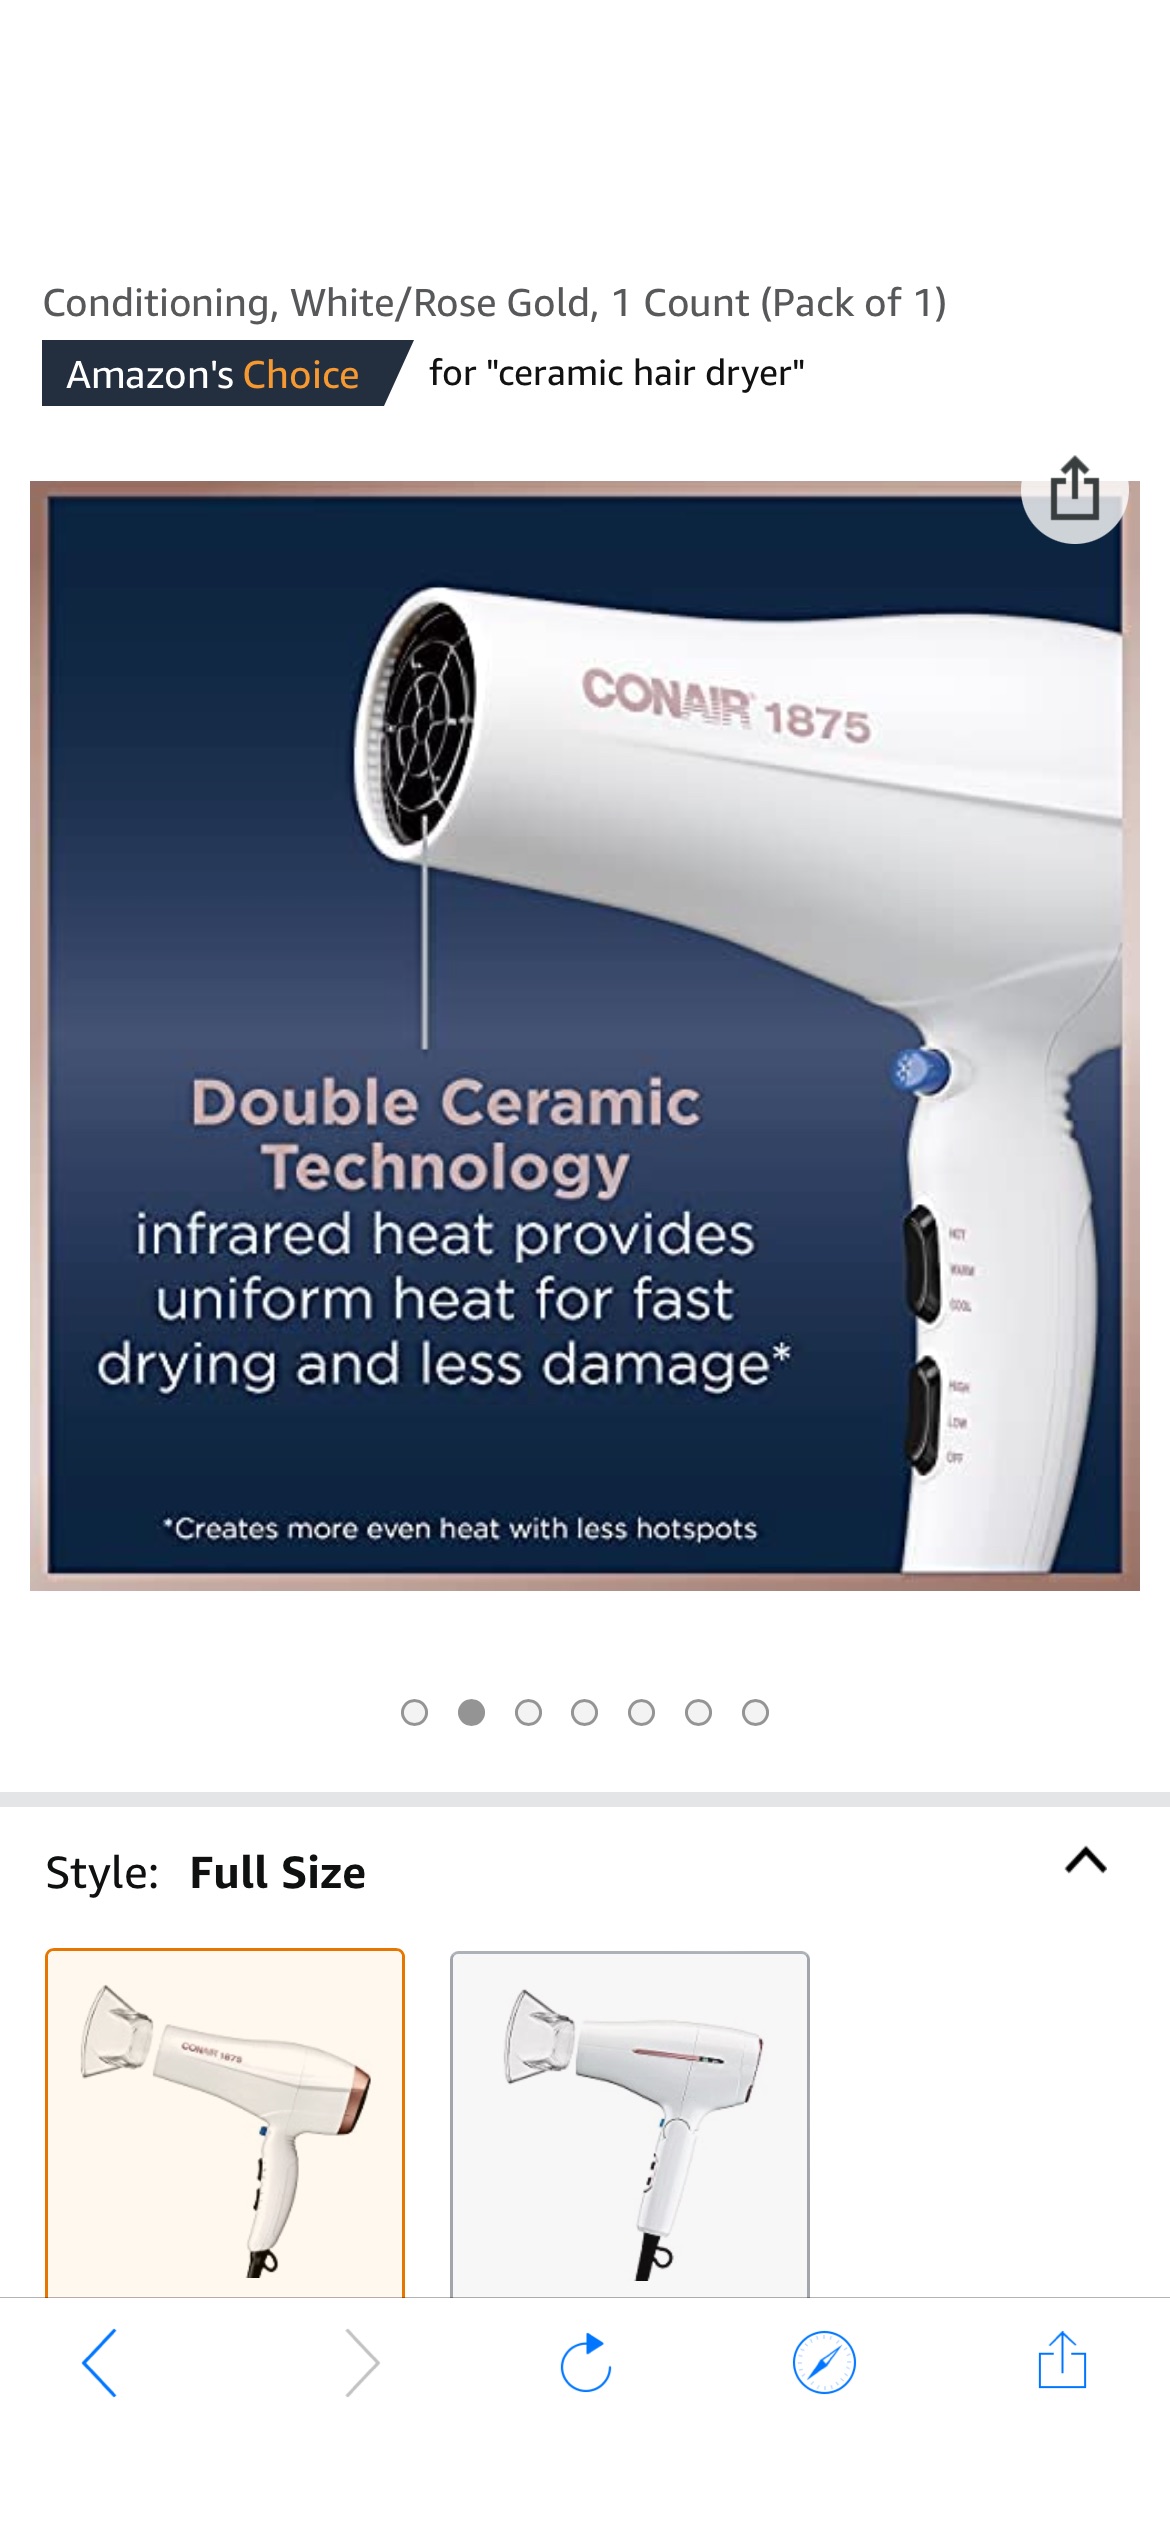 Amazon.com : Conair 1875 Watt Double Ceramic Hair Dryer with Ionic Conditioning, White/Rose Gold, 1 Count (Pack of 1) : Beauty & Personal Care 吹风机